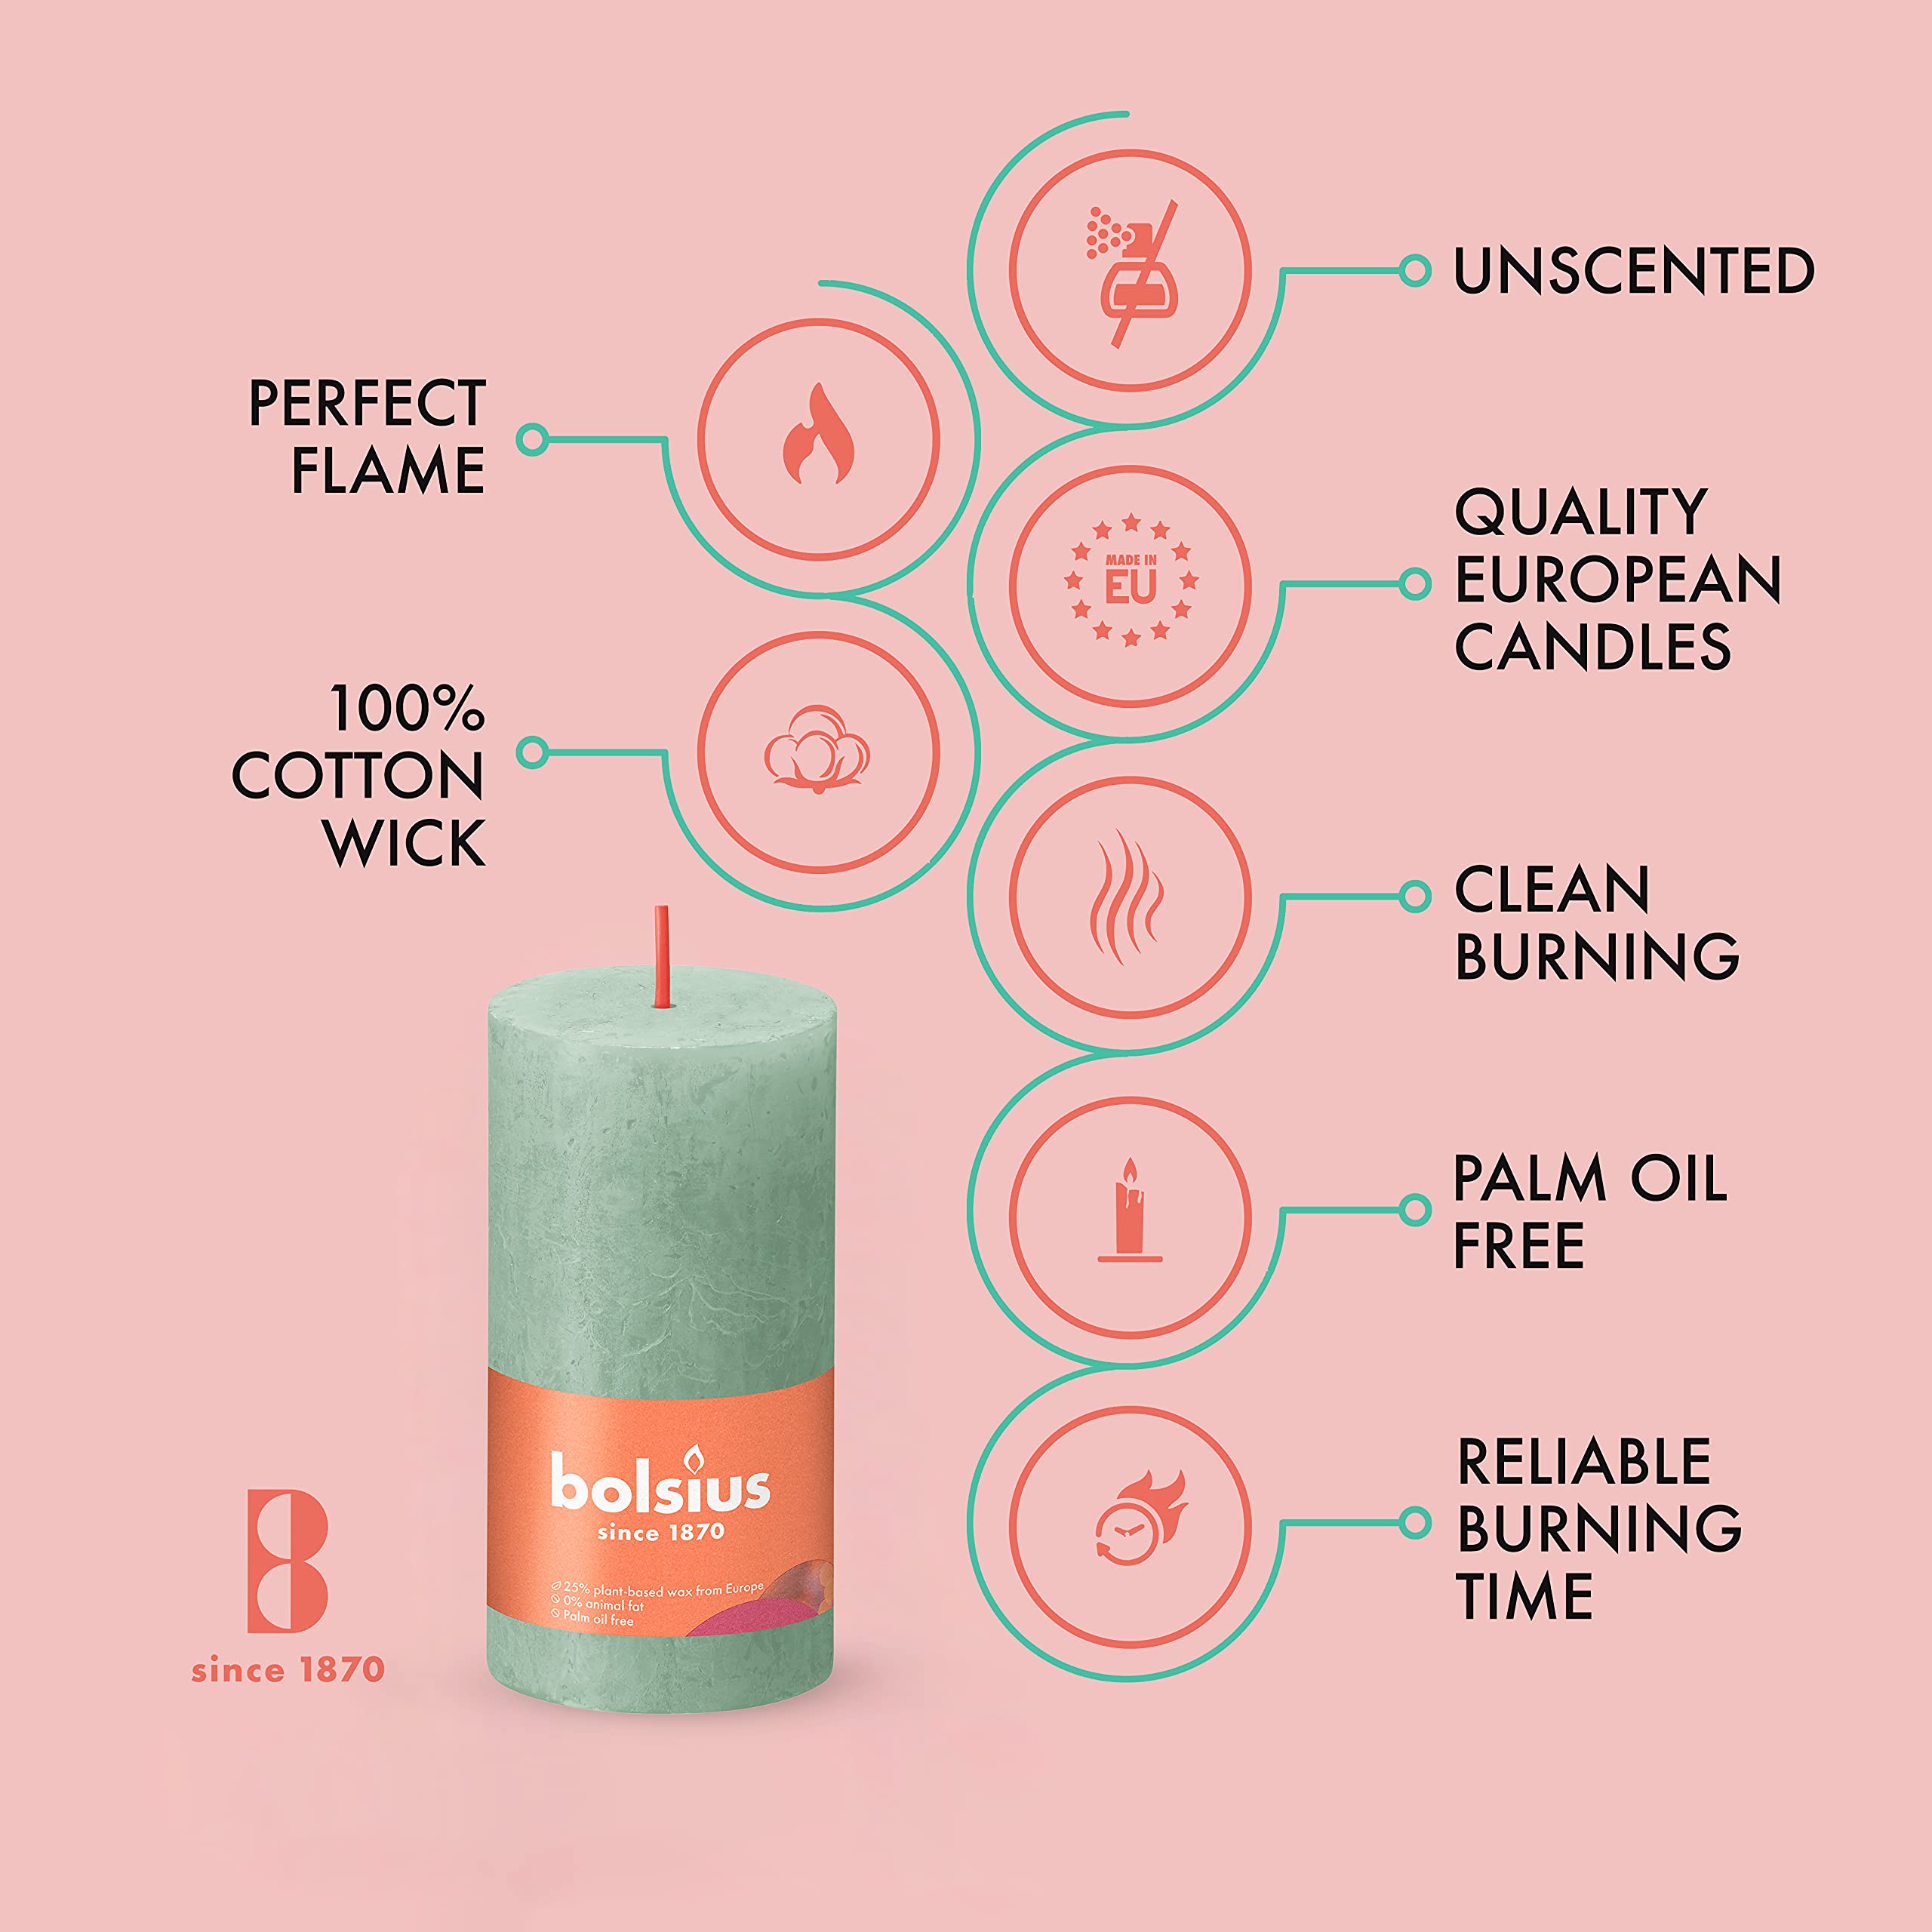 BOLSIUS 4 Pack Sage Green Rustic Pillar Candles - 2 X 4 Inches - Premium European Quality - Includes Natural Plant-Based Wax - Unscented Dripless Smokeless 30 Hour Party and Wedding Candles  - Acceptable